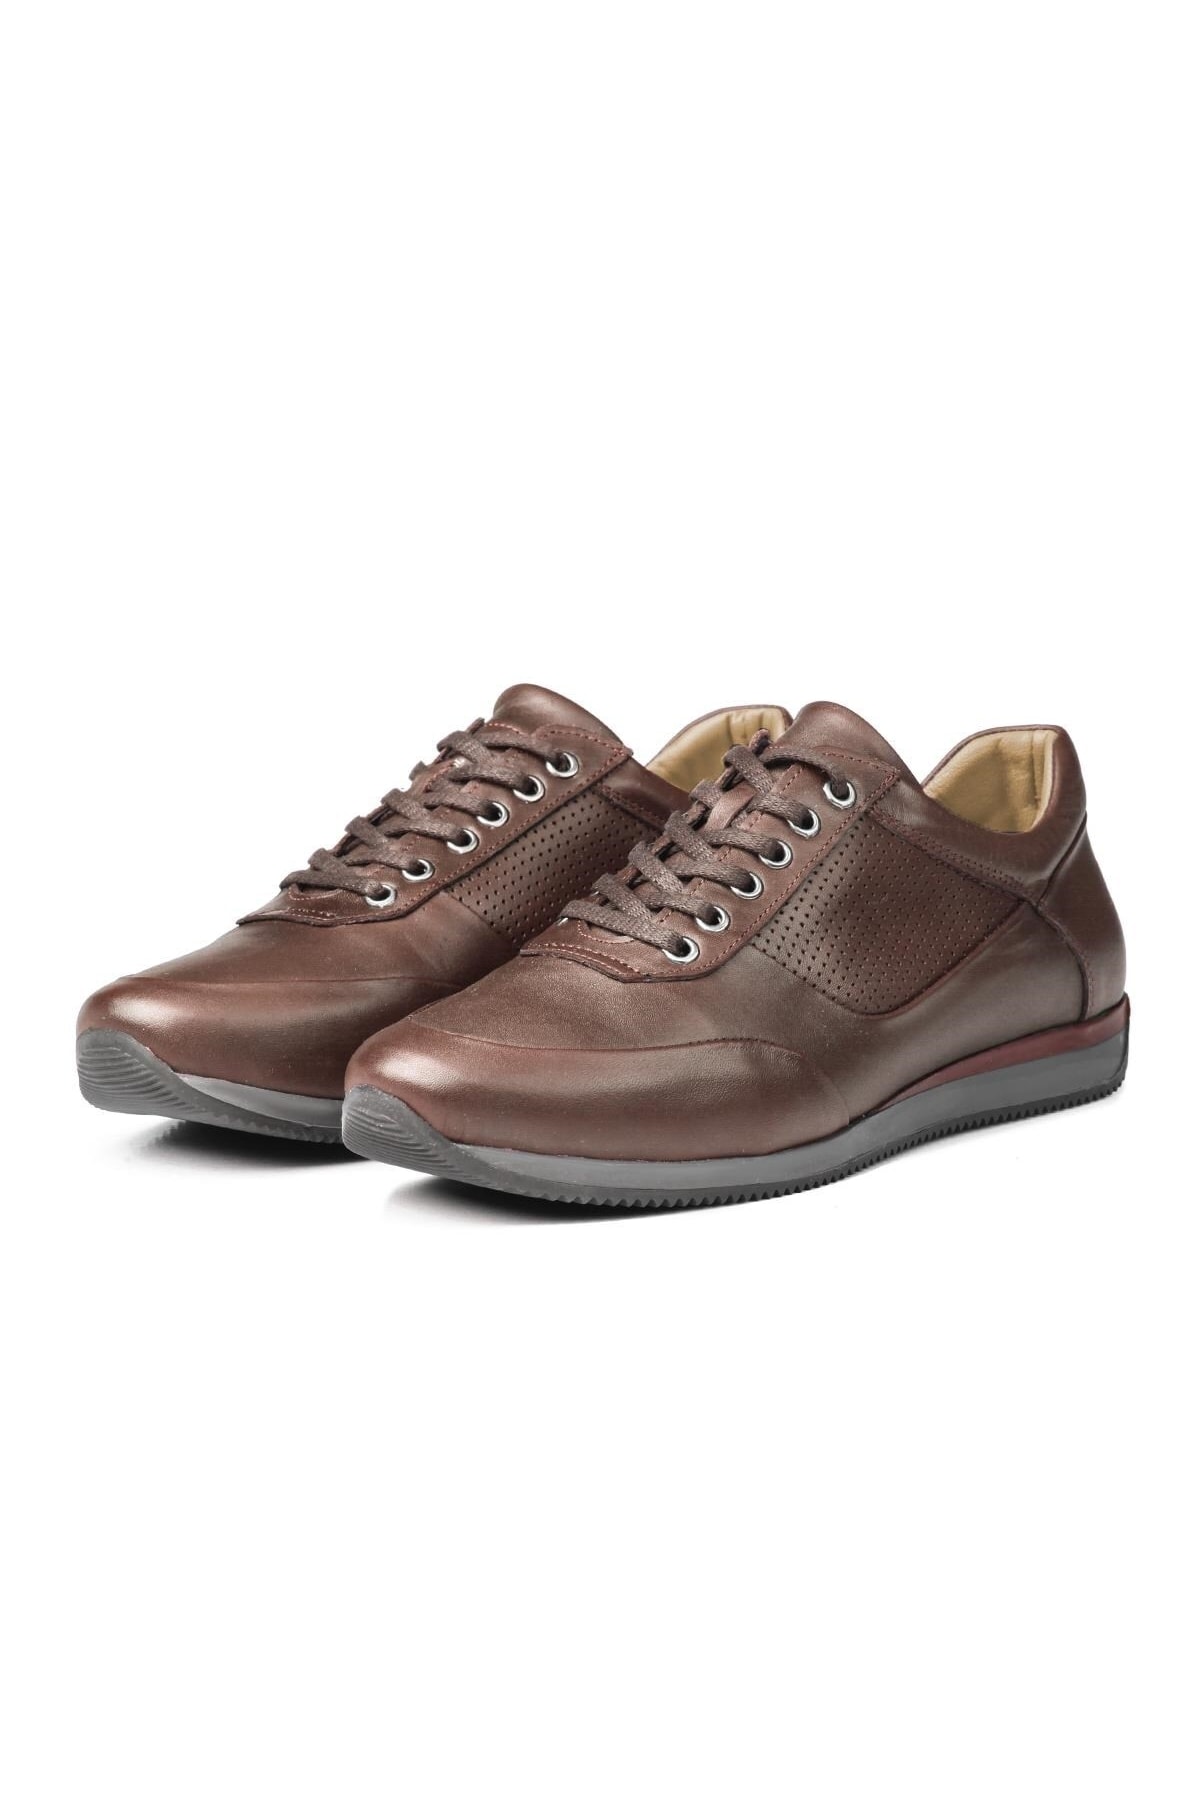 Levně Ducavelli Lion Point Men's Casual Shoes From Genuine Leather With Plush Sheepskin Brown.